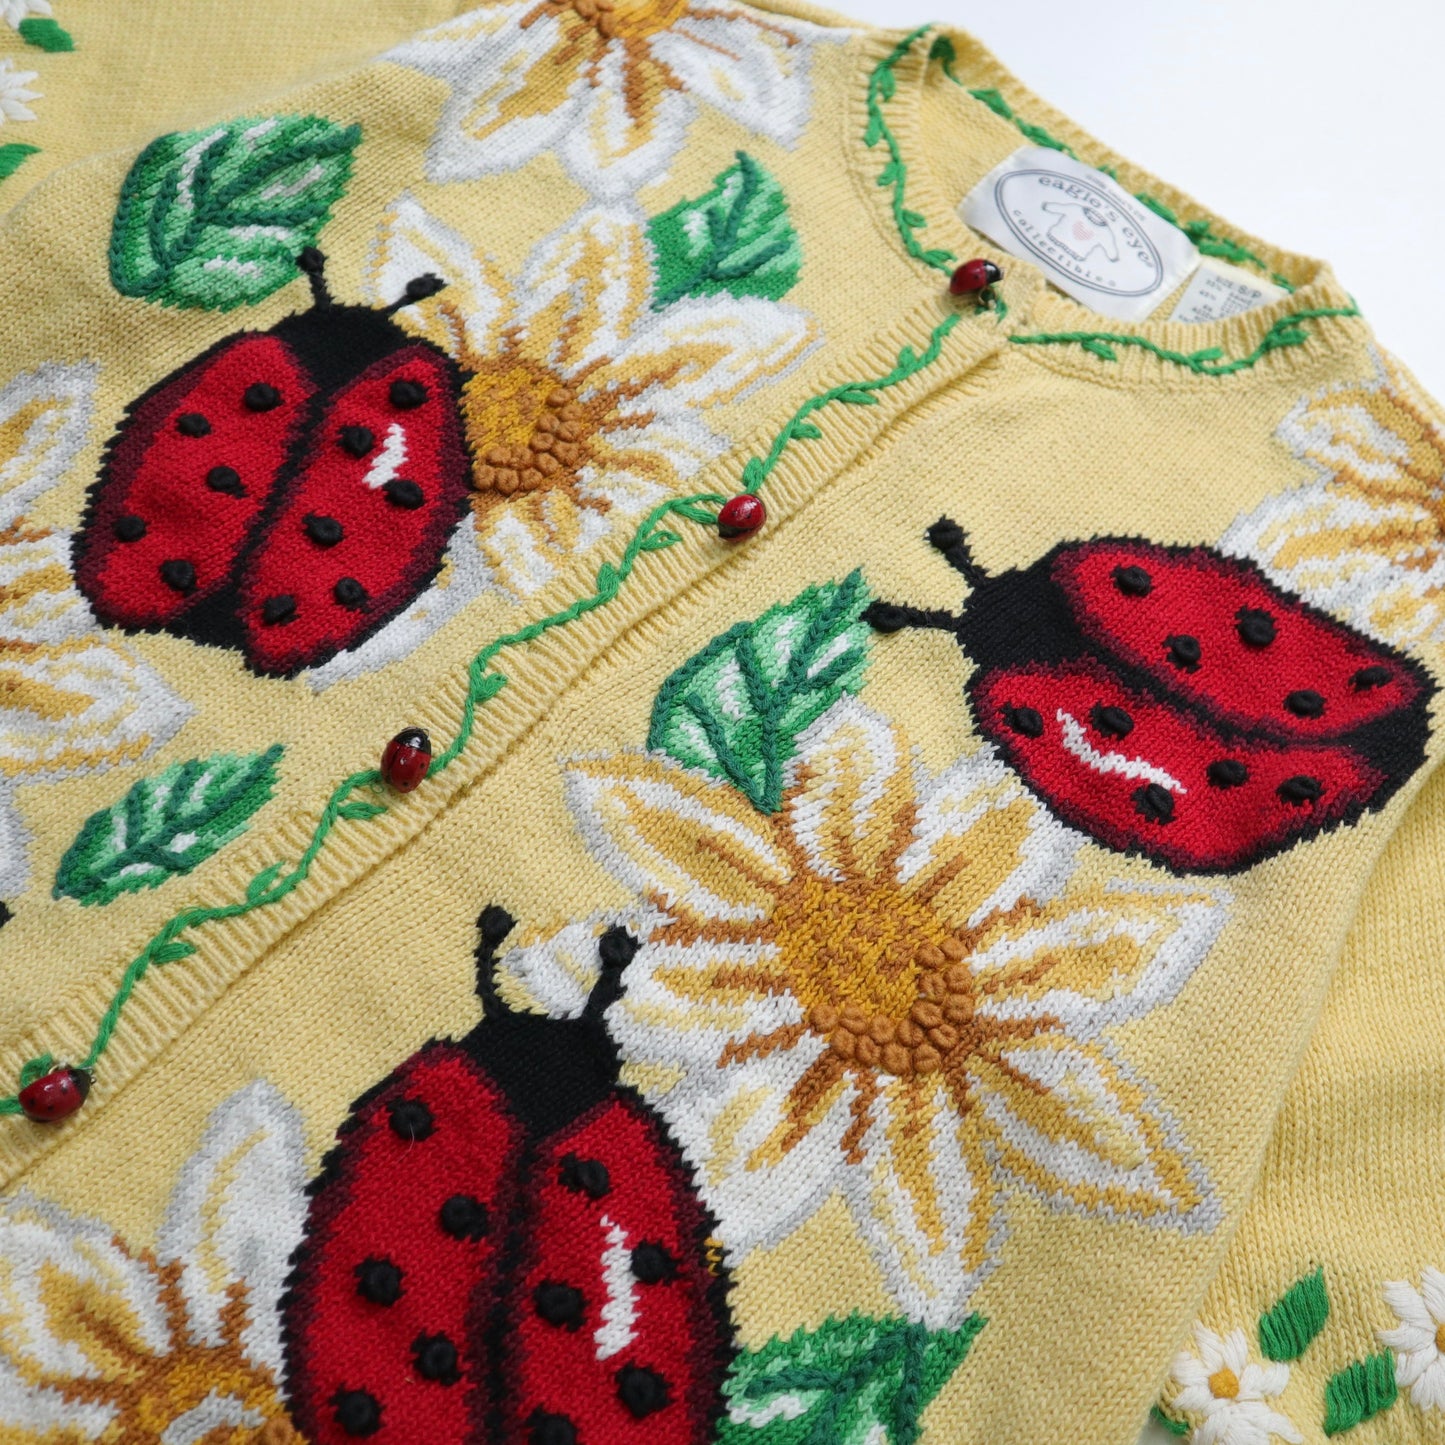 90s eagle's eye three-dimensional ladybug knitted top